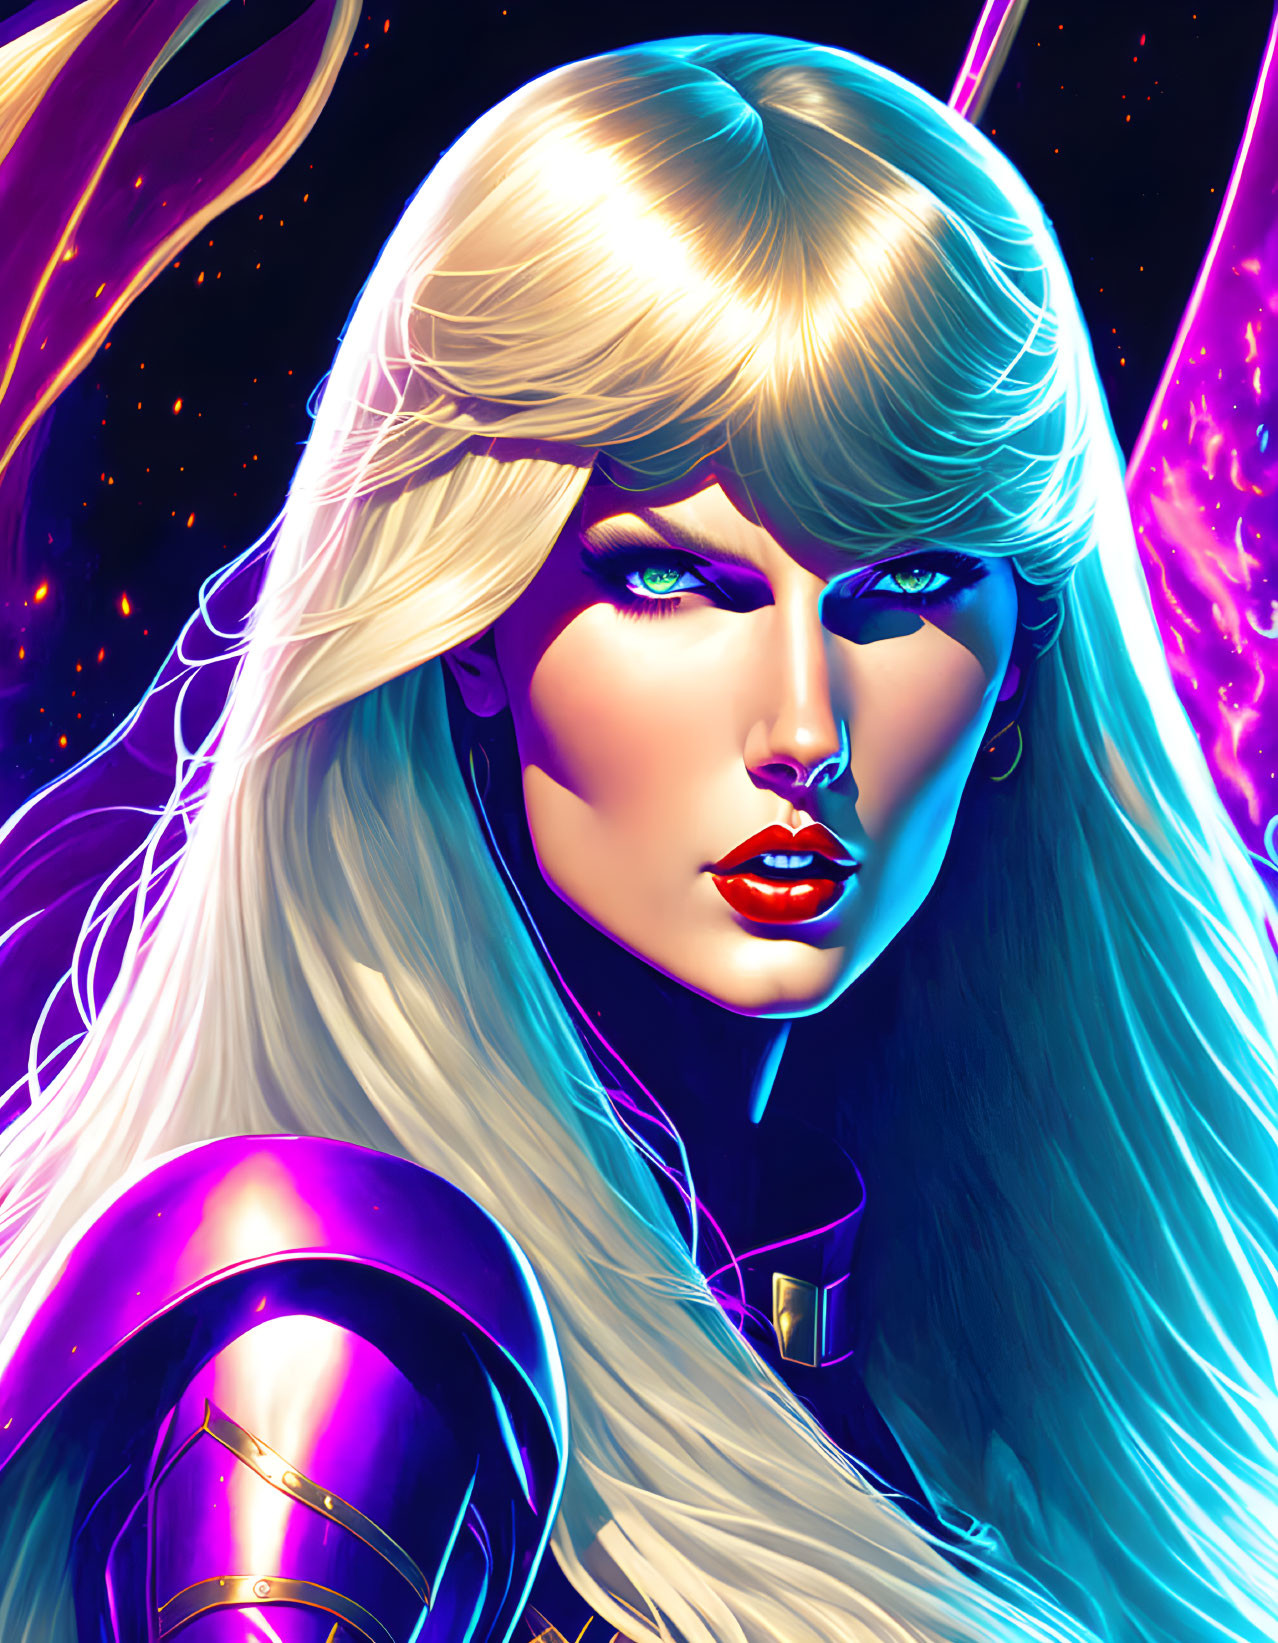 Futuristic woman with platinum blonde hair in vibrant cosmic setting